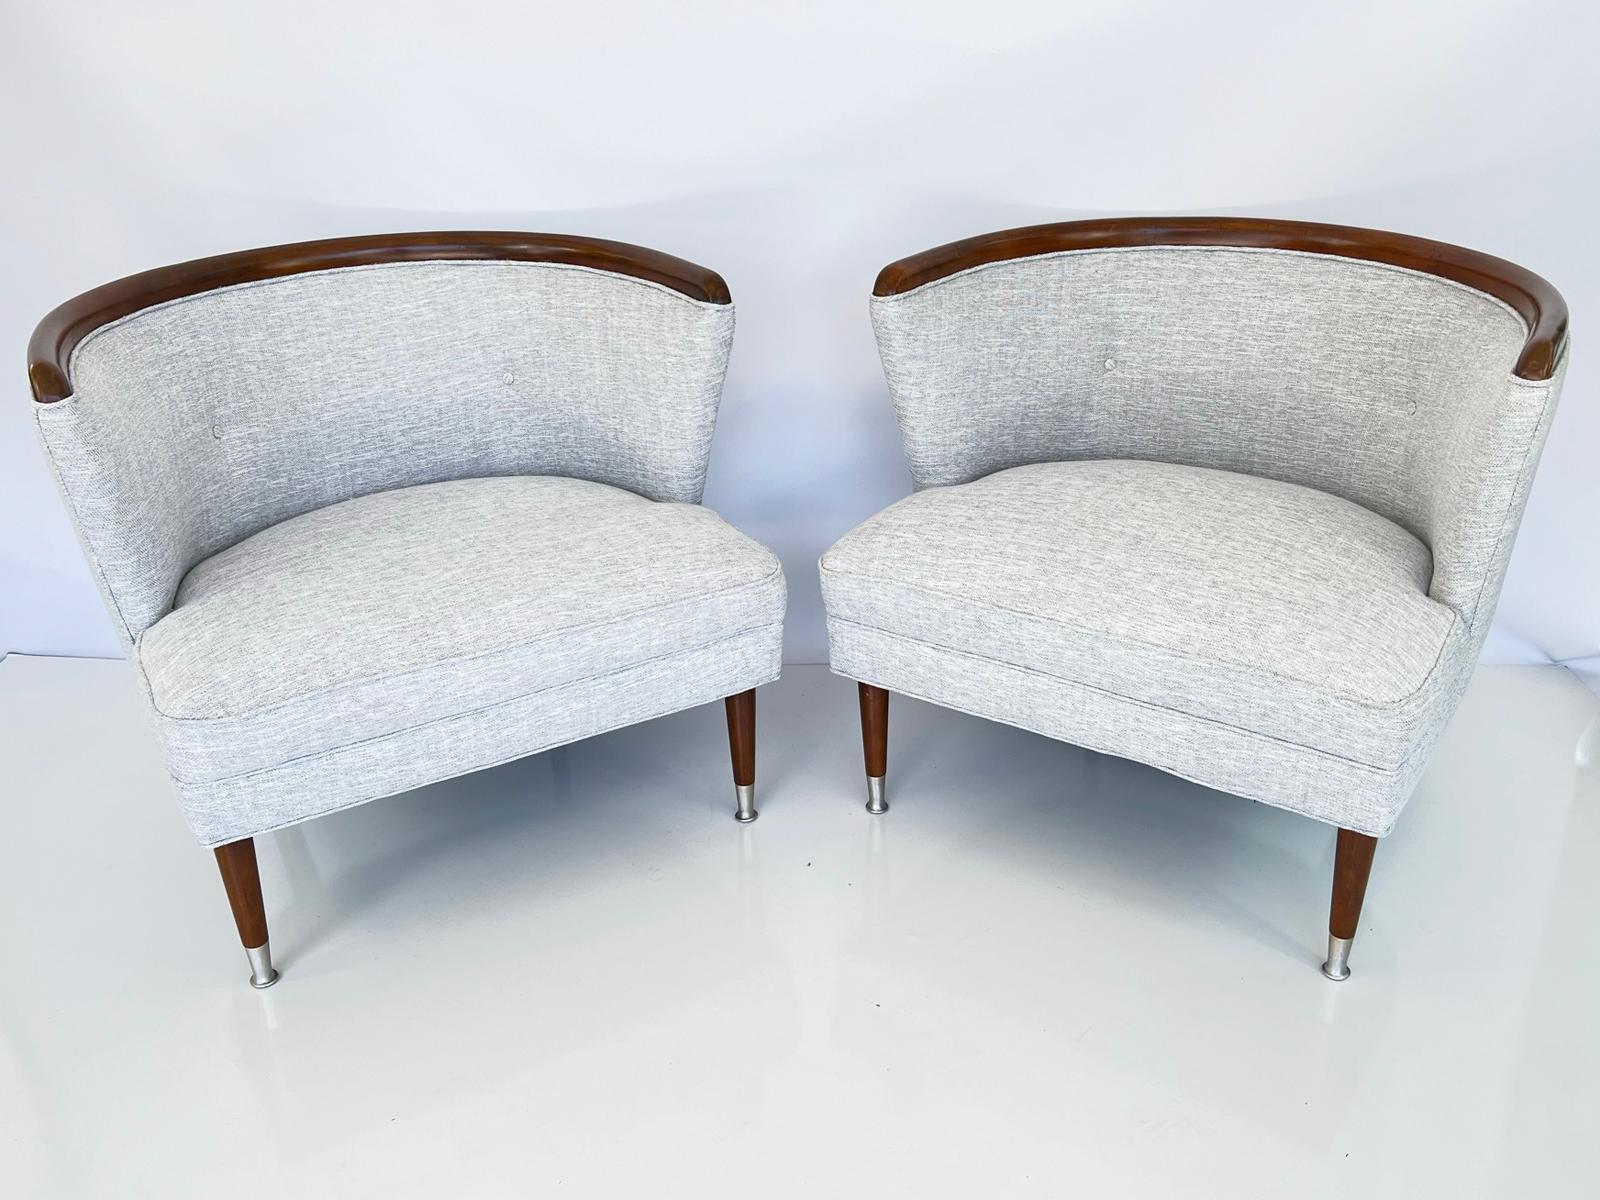 Pair of Mid-century barrel style bergère armchairs upholstered in blue/gray linen. Each tub-form chair having a bowed crestrail of walnut surmounting its padded and tufted backrest. A loose, drop-in cushion sits on a conforming deck, raised on